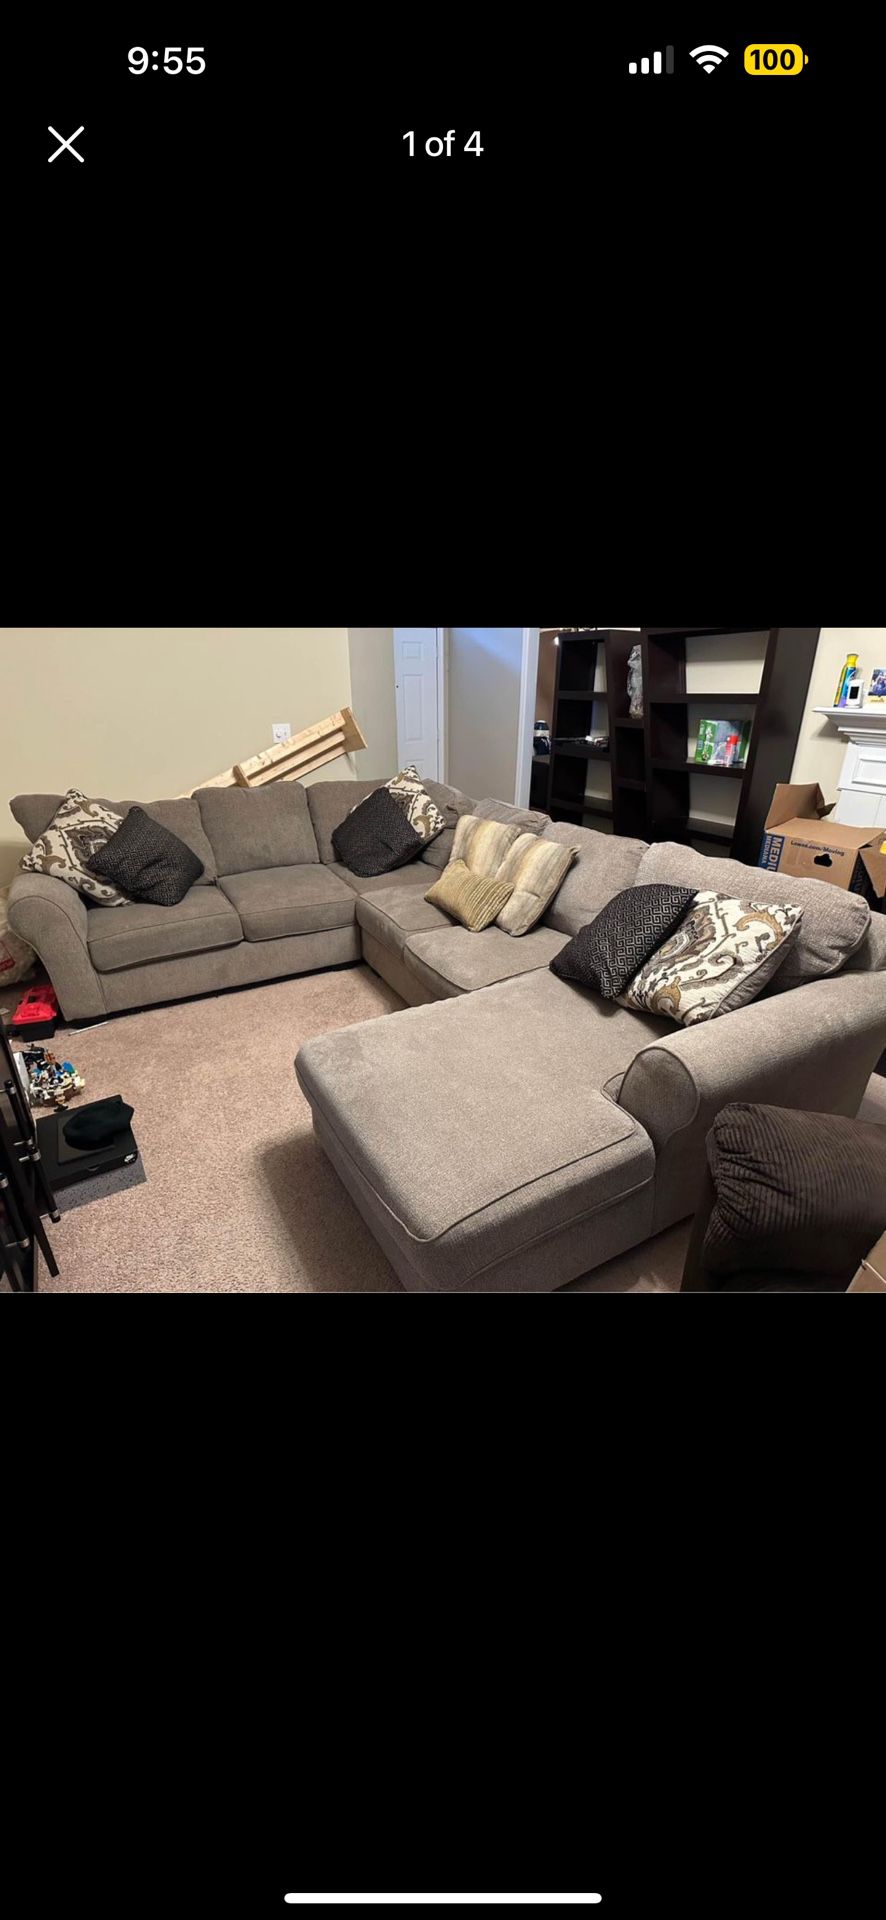 Large Couch Like New W/Decorative Pillows